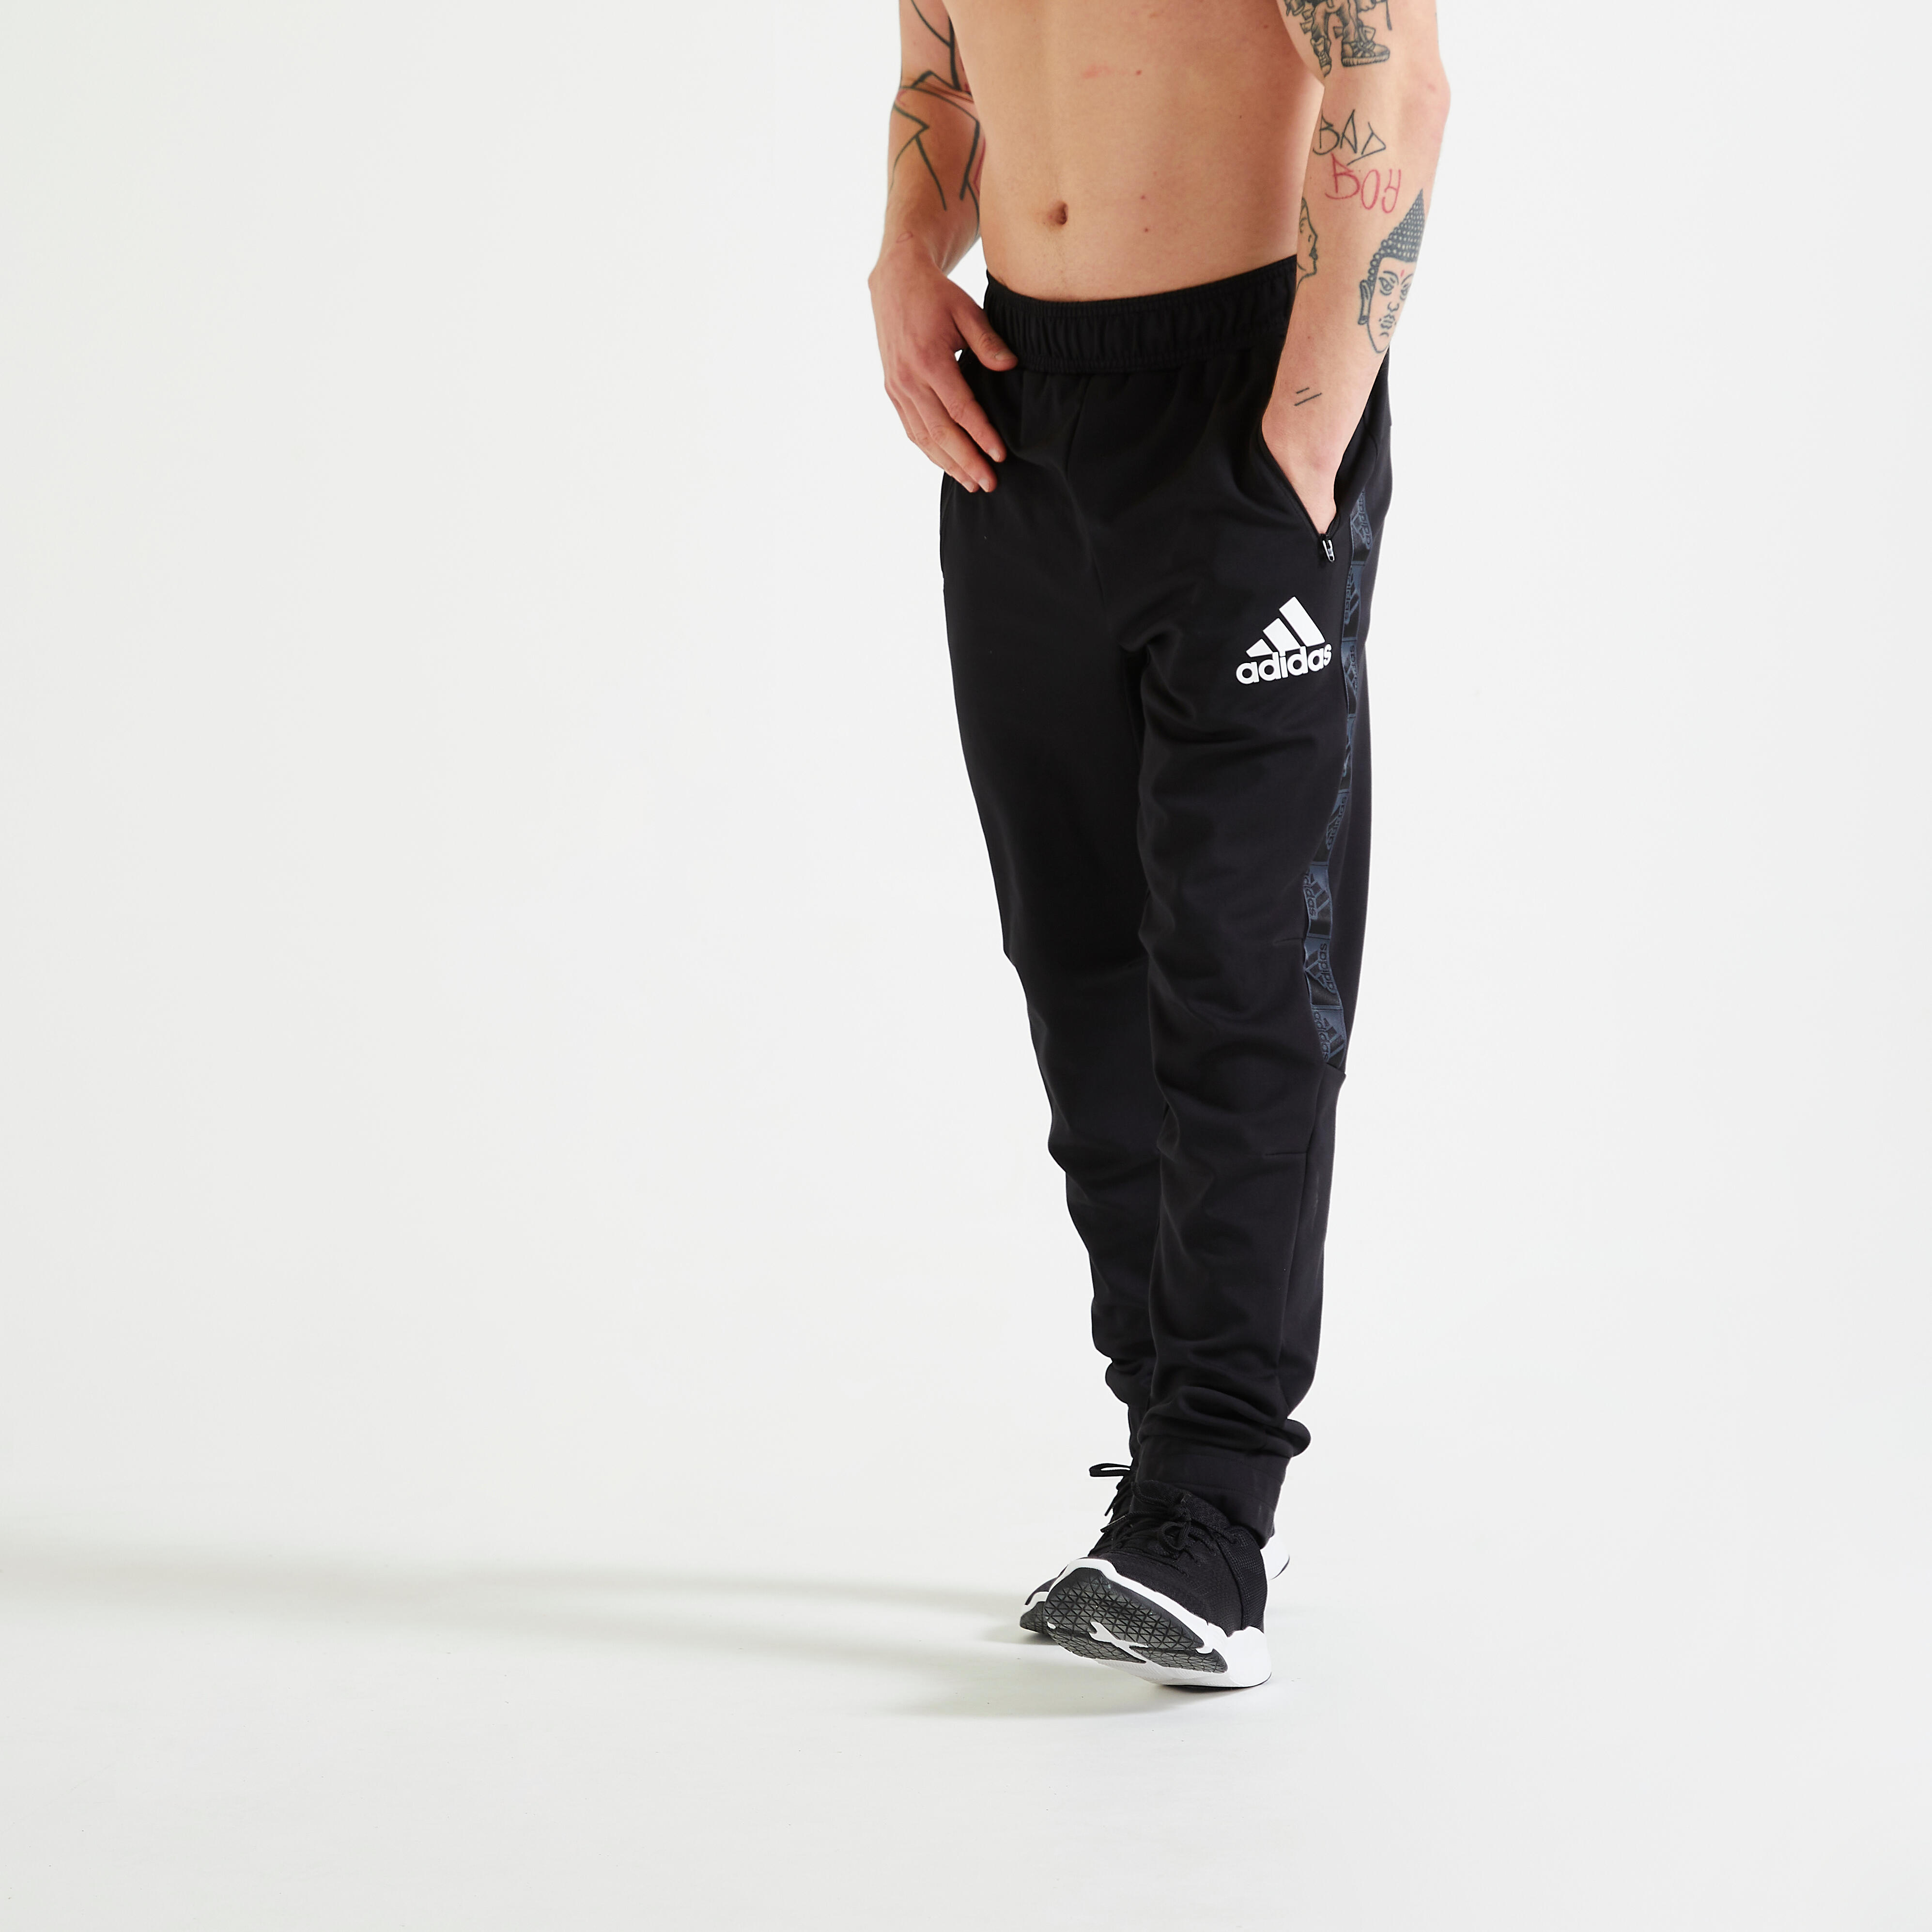 Track Pants, Straight fit, TSR... - Decathlon Sports India | Facebook